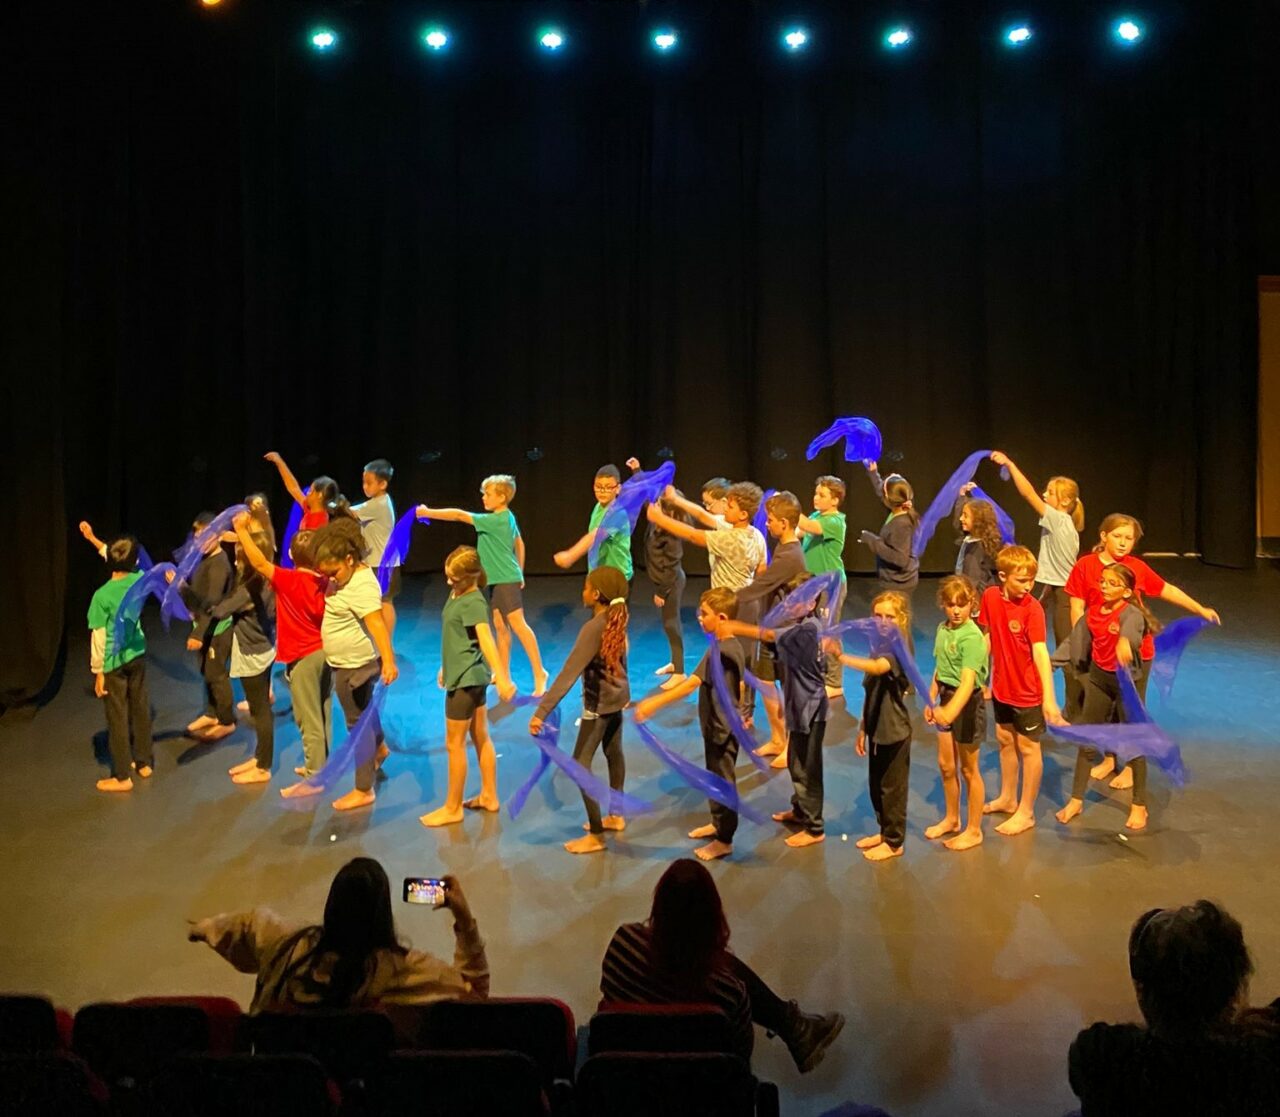 Children in colourful t-shirts performing on stage waving blue scarves